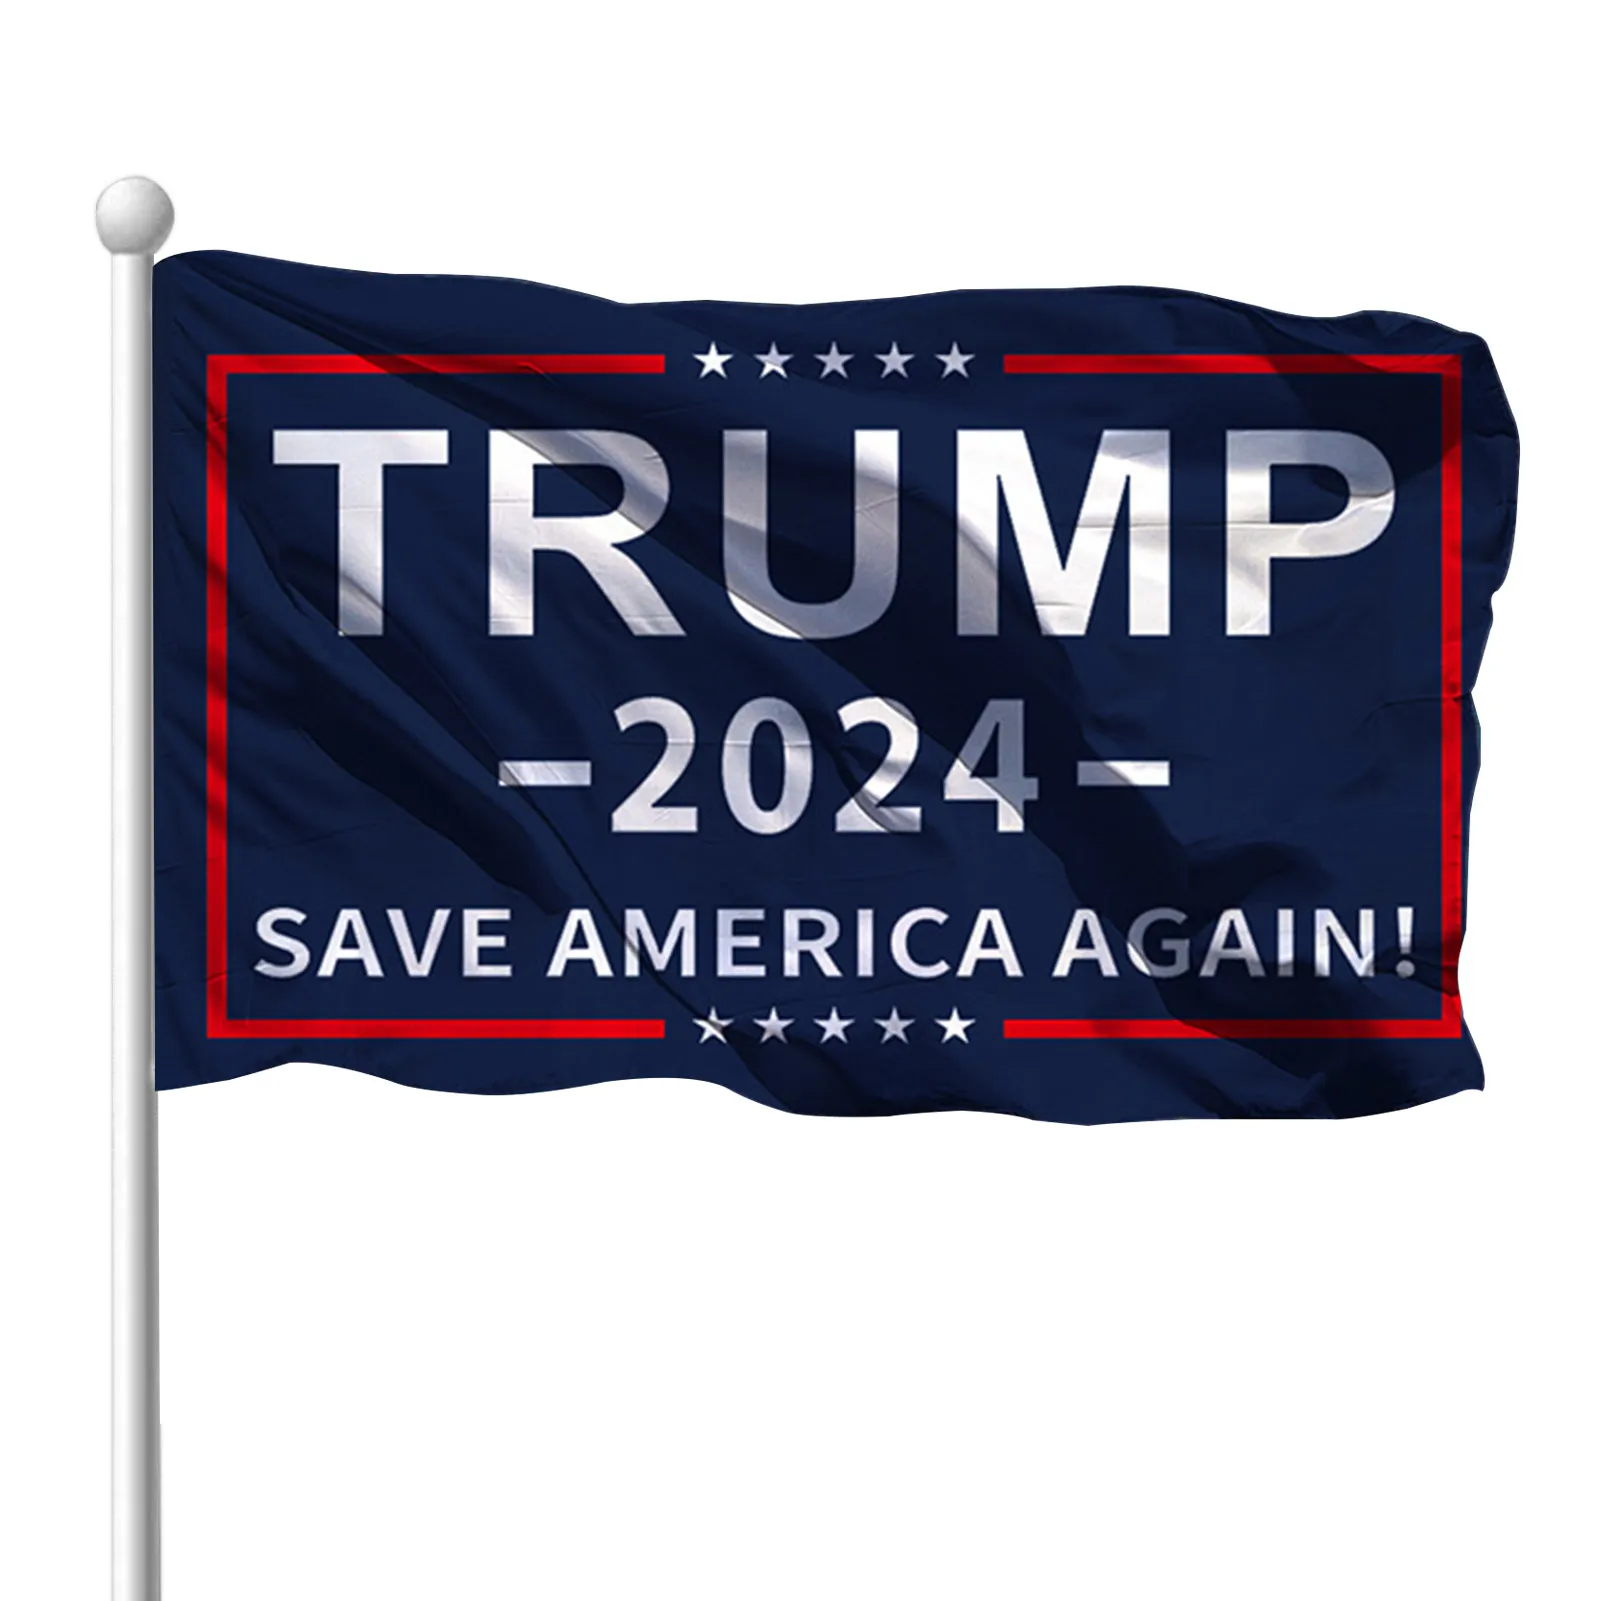 

Donald Trump Flags 2024 3x5ft President Trump Flags Save America Again Take America Back Outdoor Indoor Garden Banner With Brass